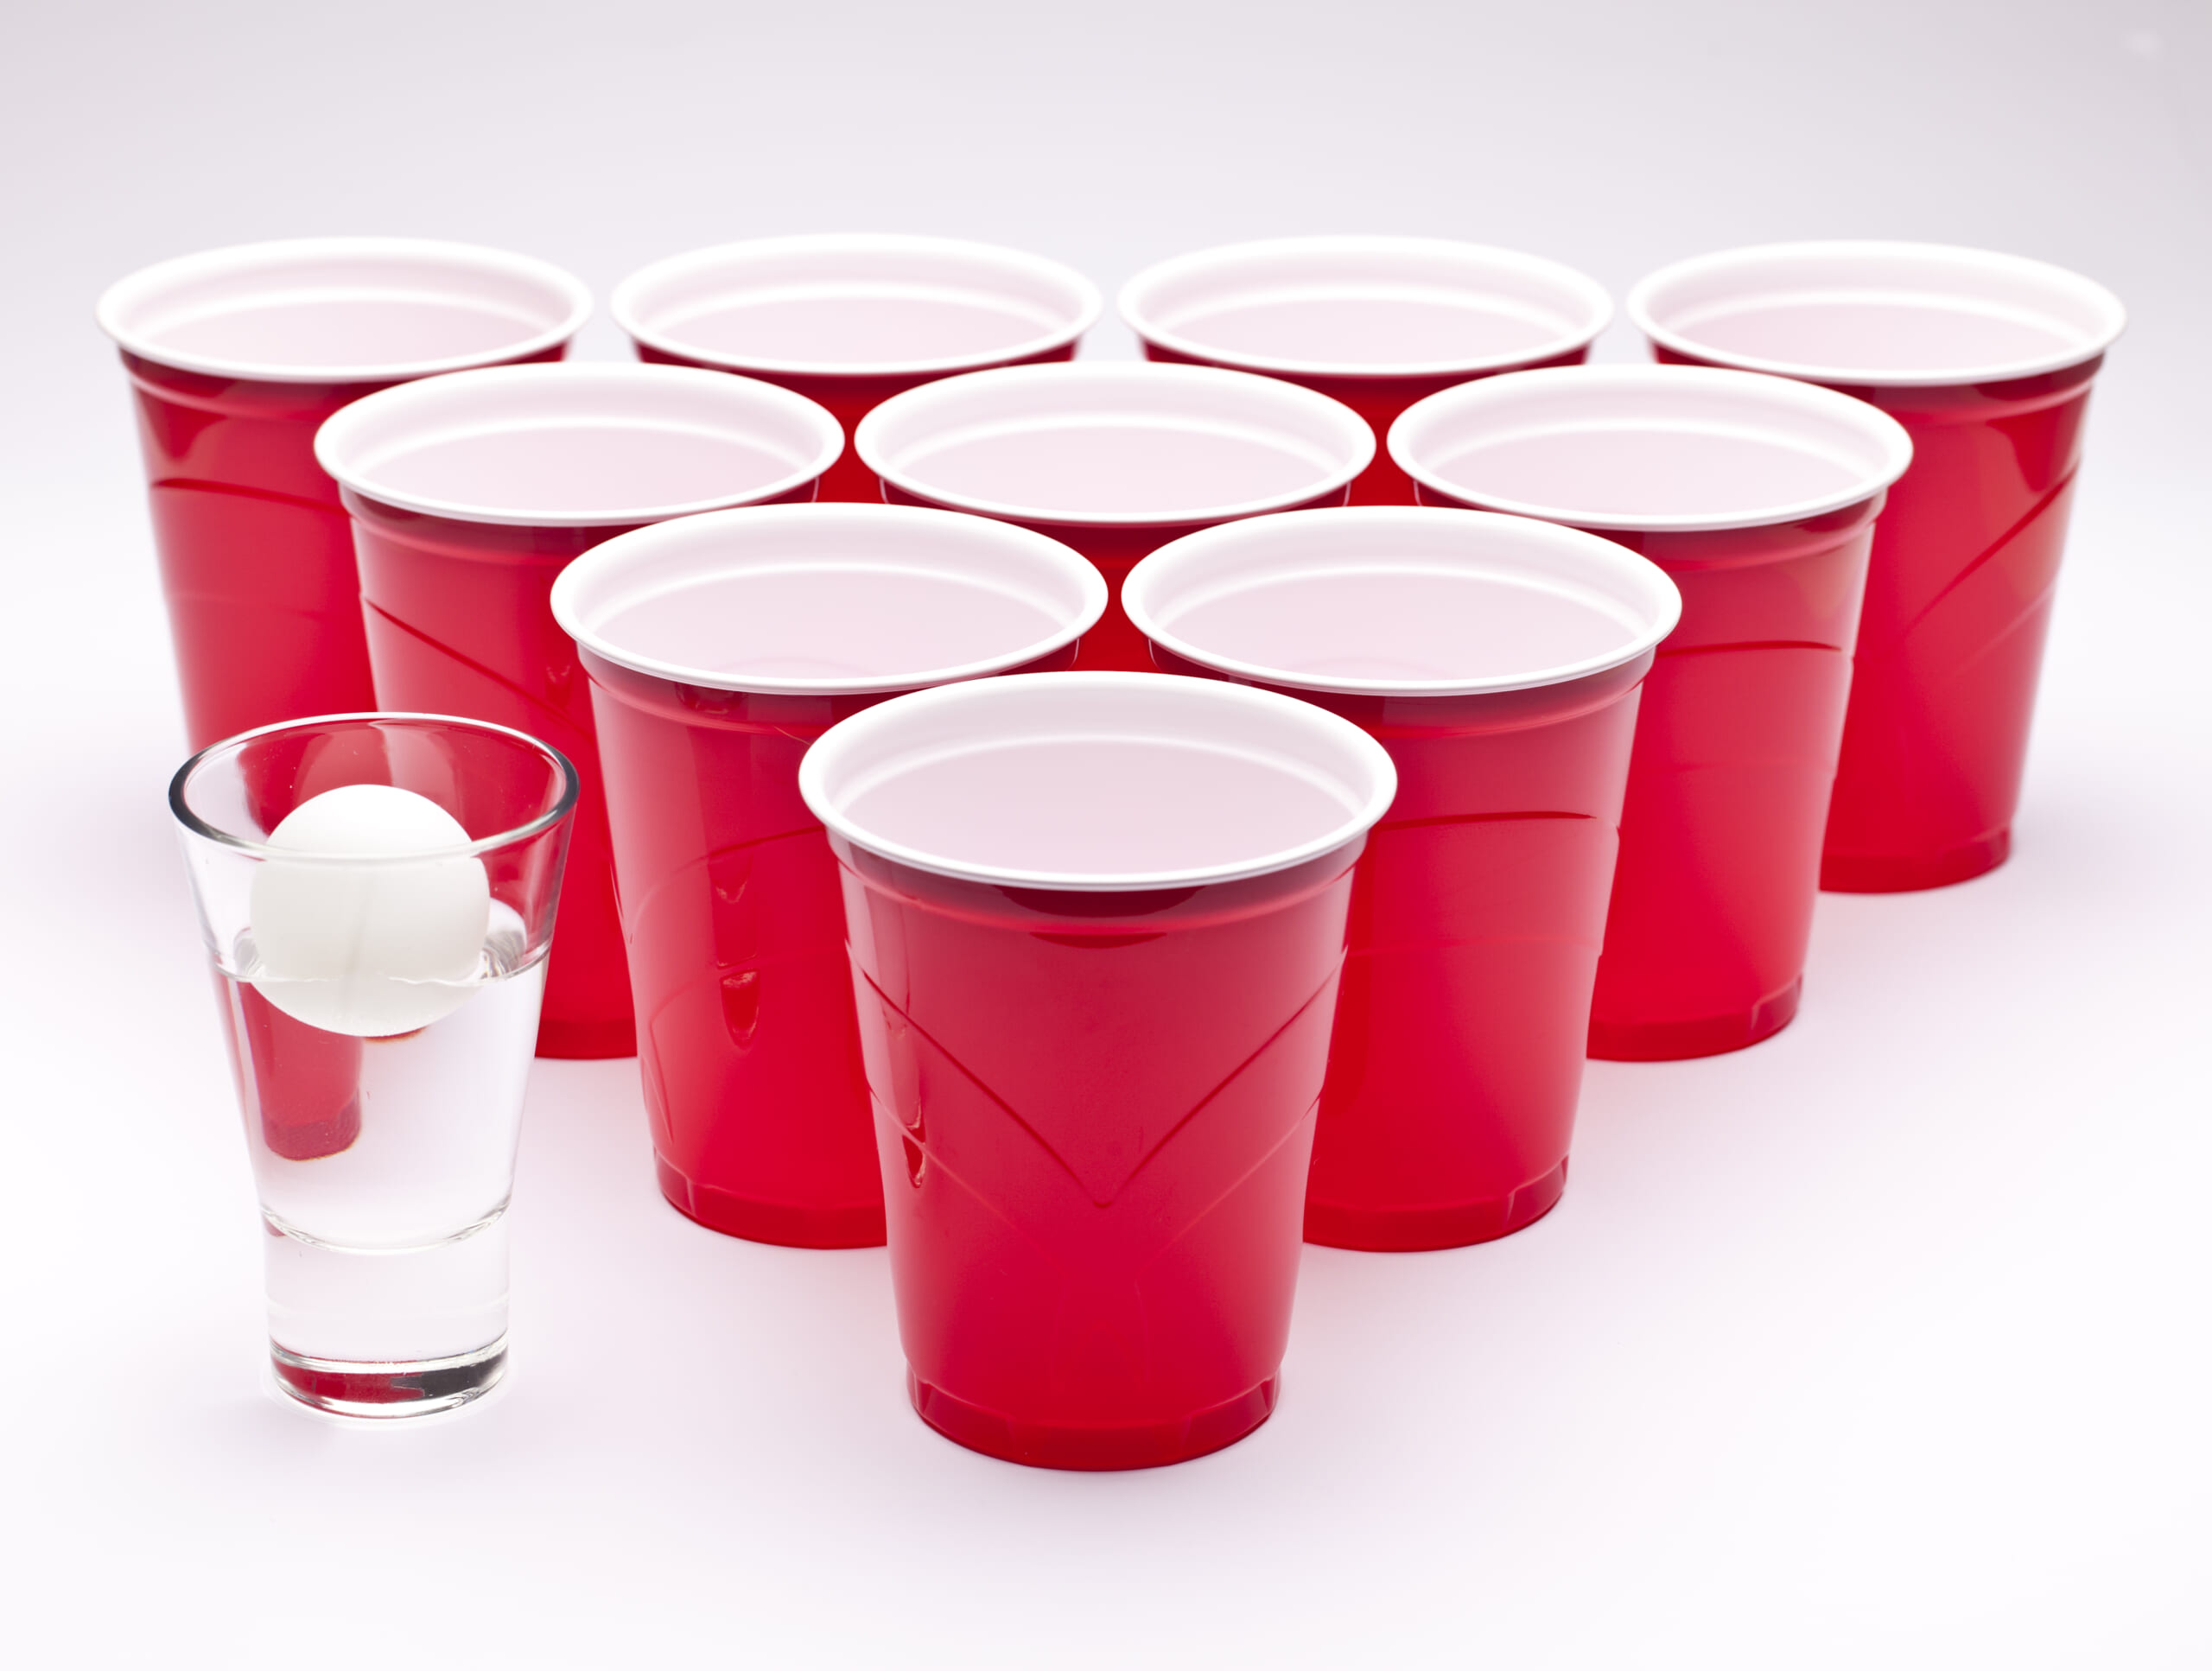 Pour One Out To Remember the Inventor of the Iconic Red Solo Cup